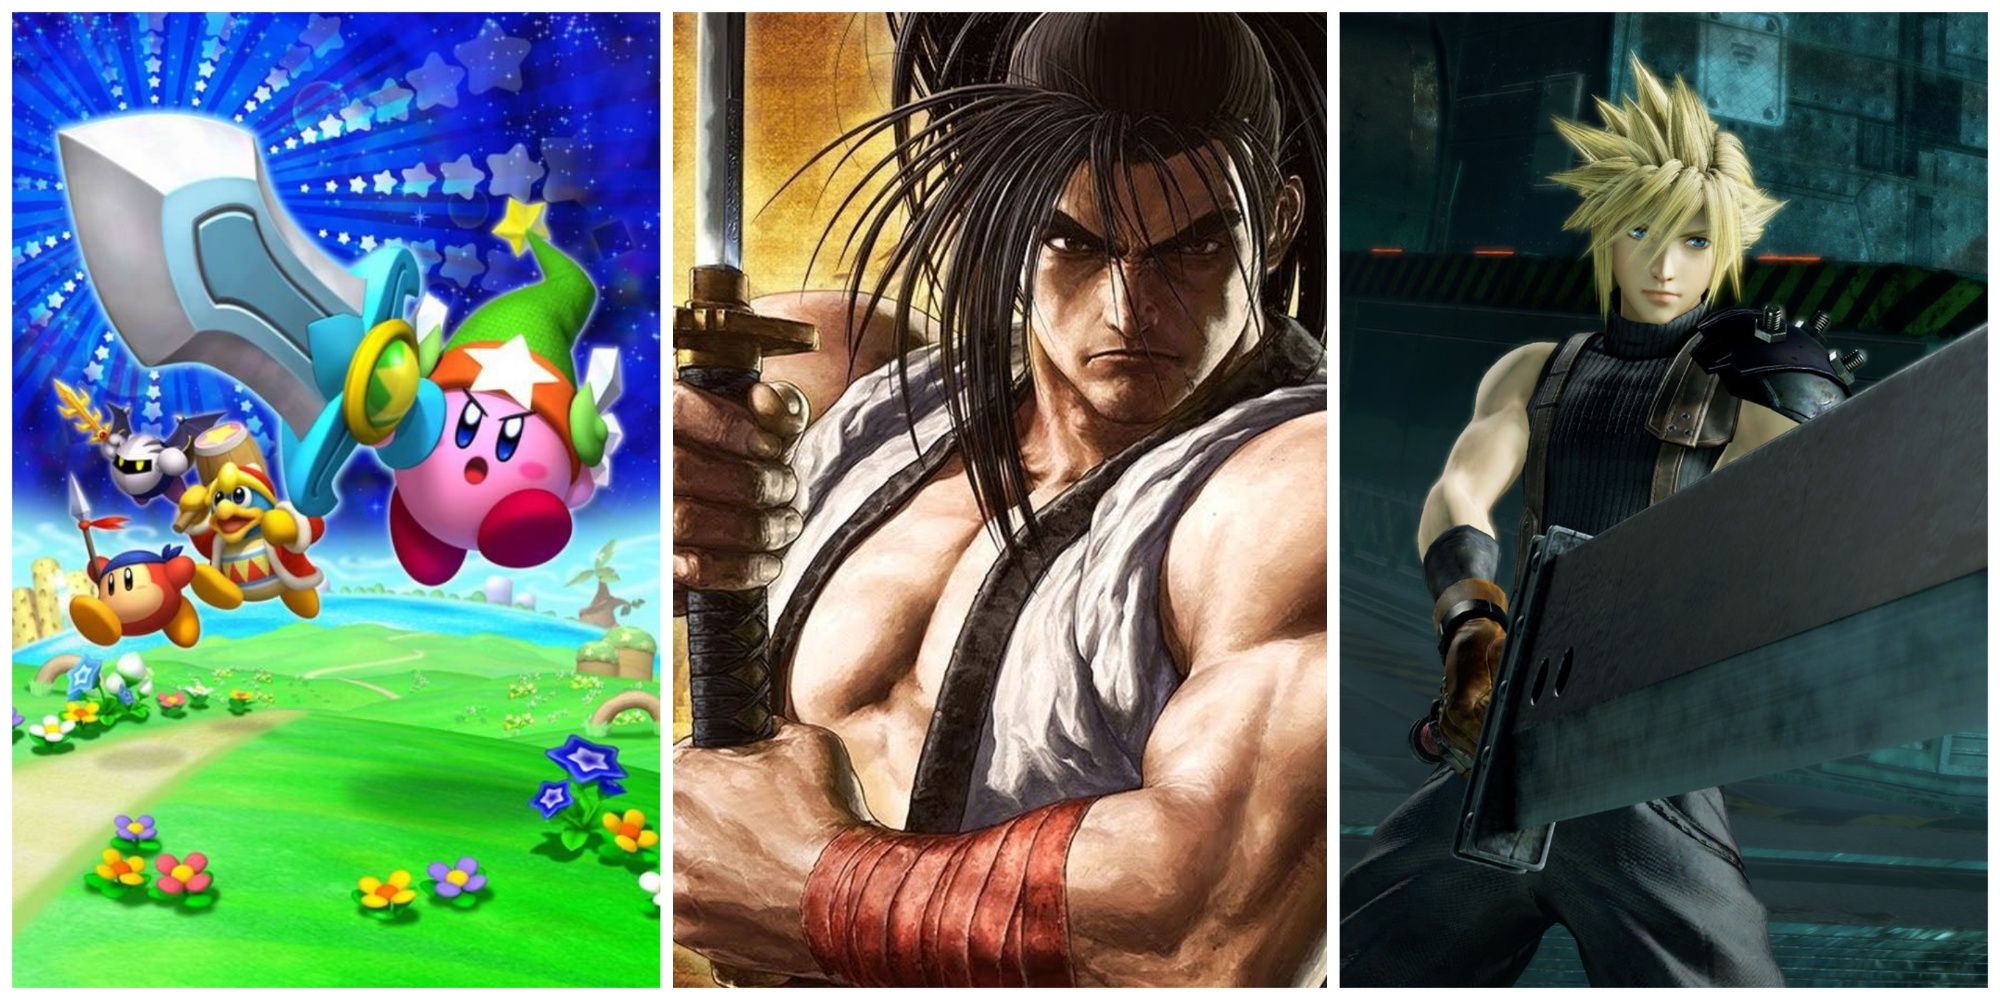 Kirby with sword, Meta Knight with sword, Dedede with hammer, and Bandana Waddle Dee with spear in Kirby's Return to Dreamland Cover; Haohmaru in Samurai Showdown 2019 official art, holding sword; Cloud Strife holding buster sword in Dissida NT